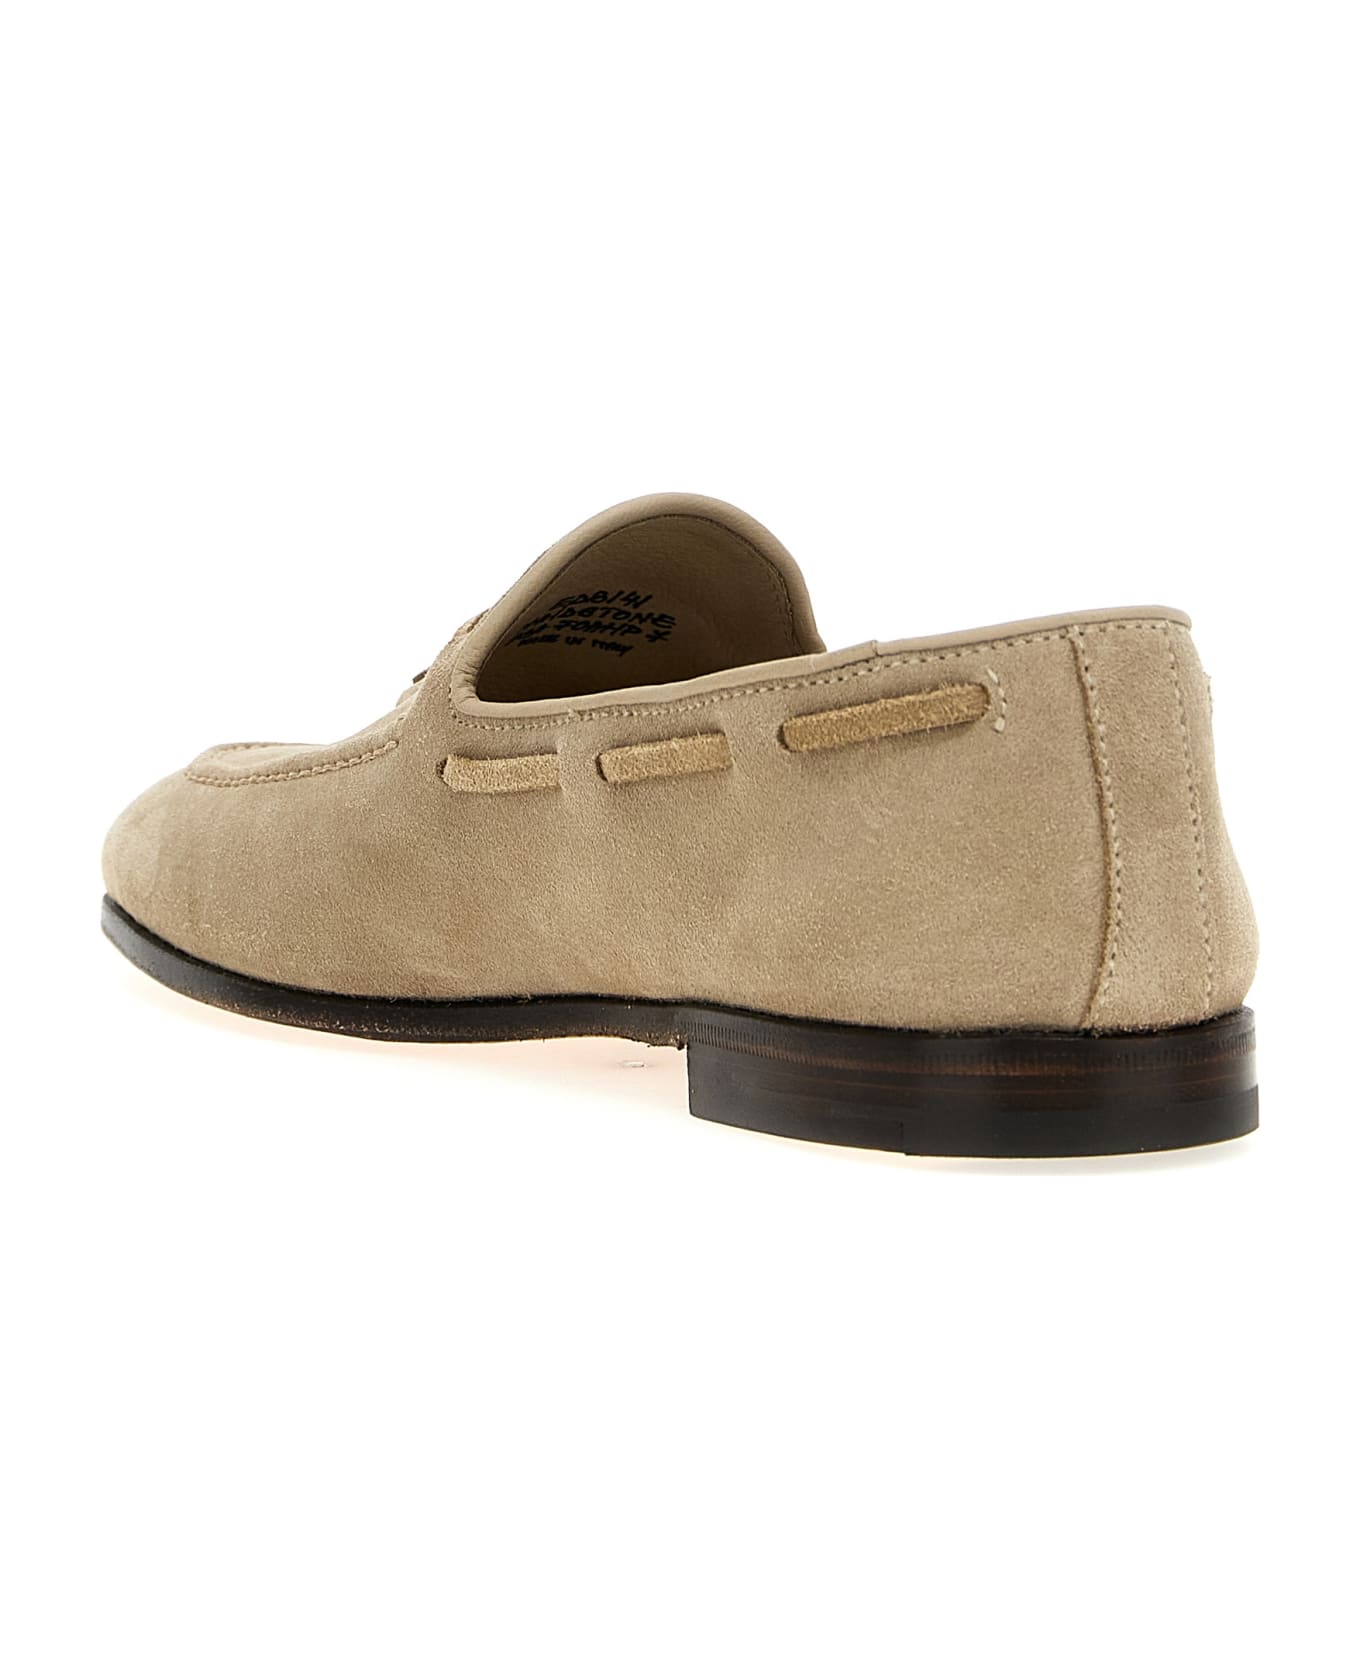 Church's 'maidstone' Loafers - Beige